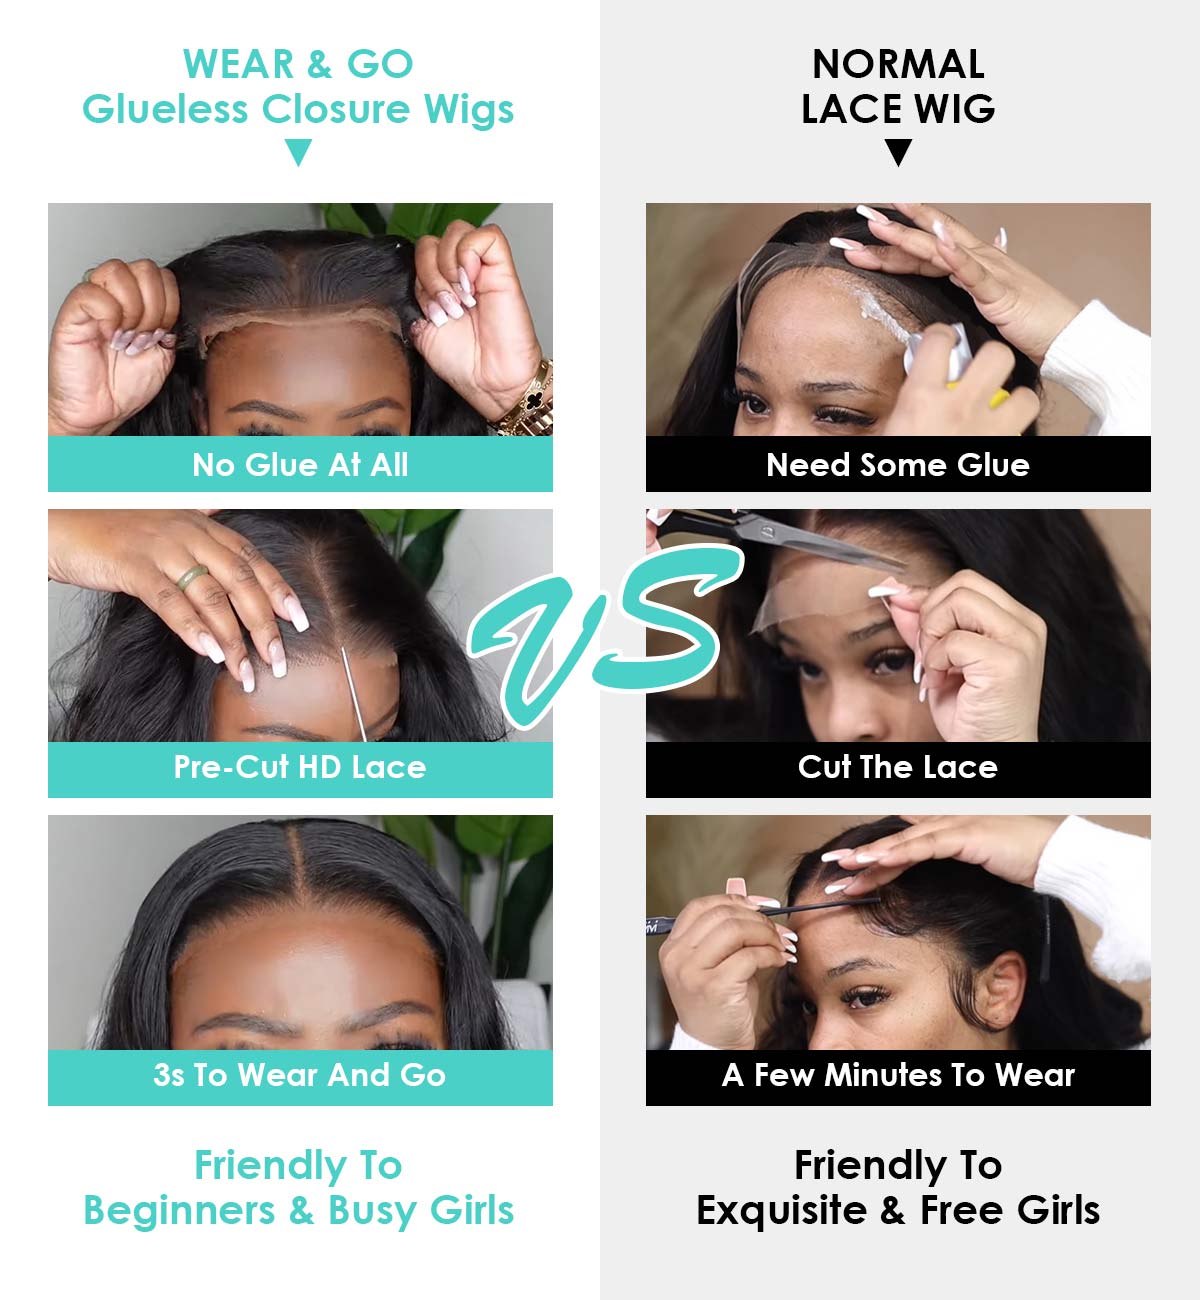 wear-go-wig-install-vs-normal-lace-wig-install